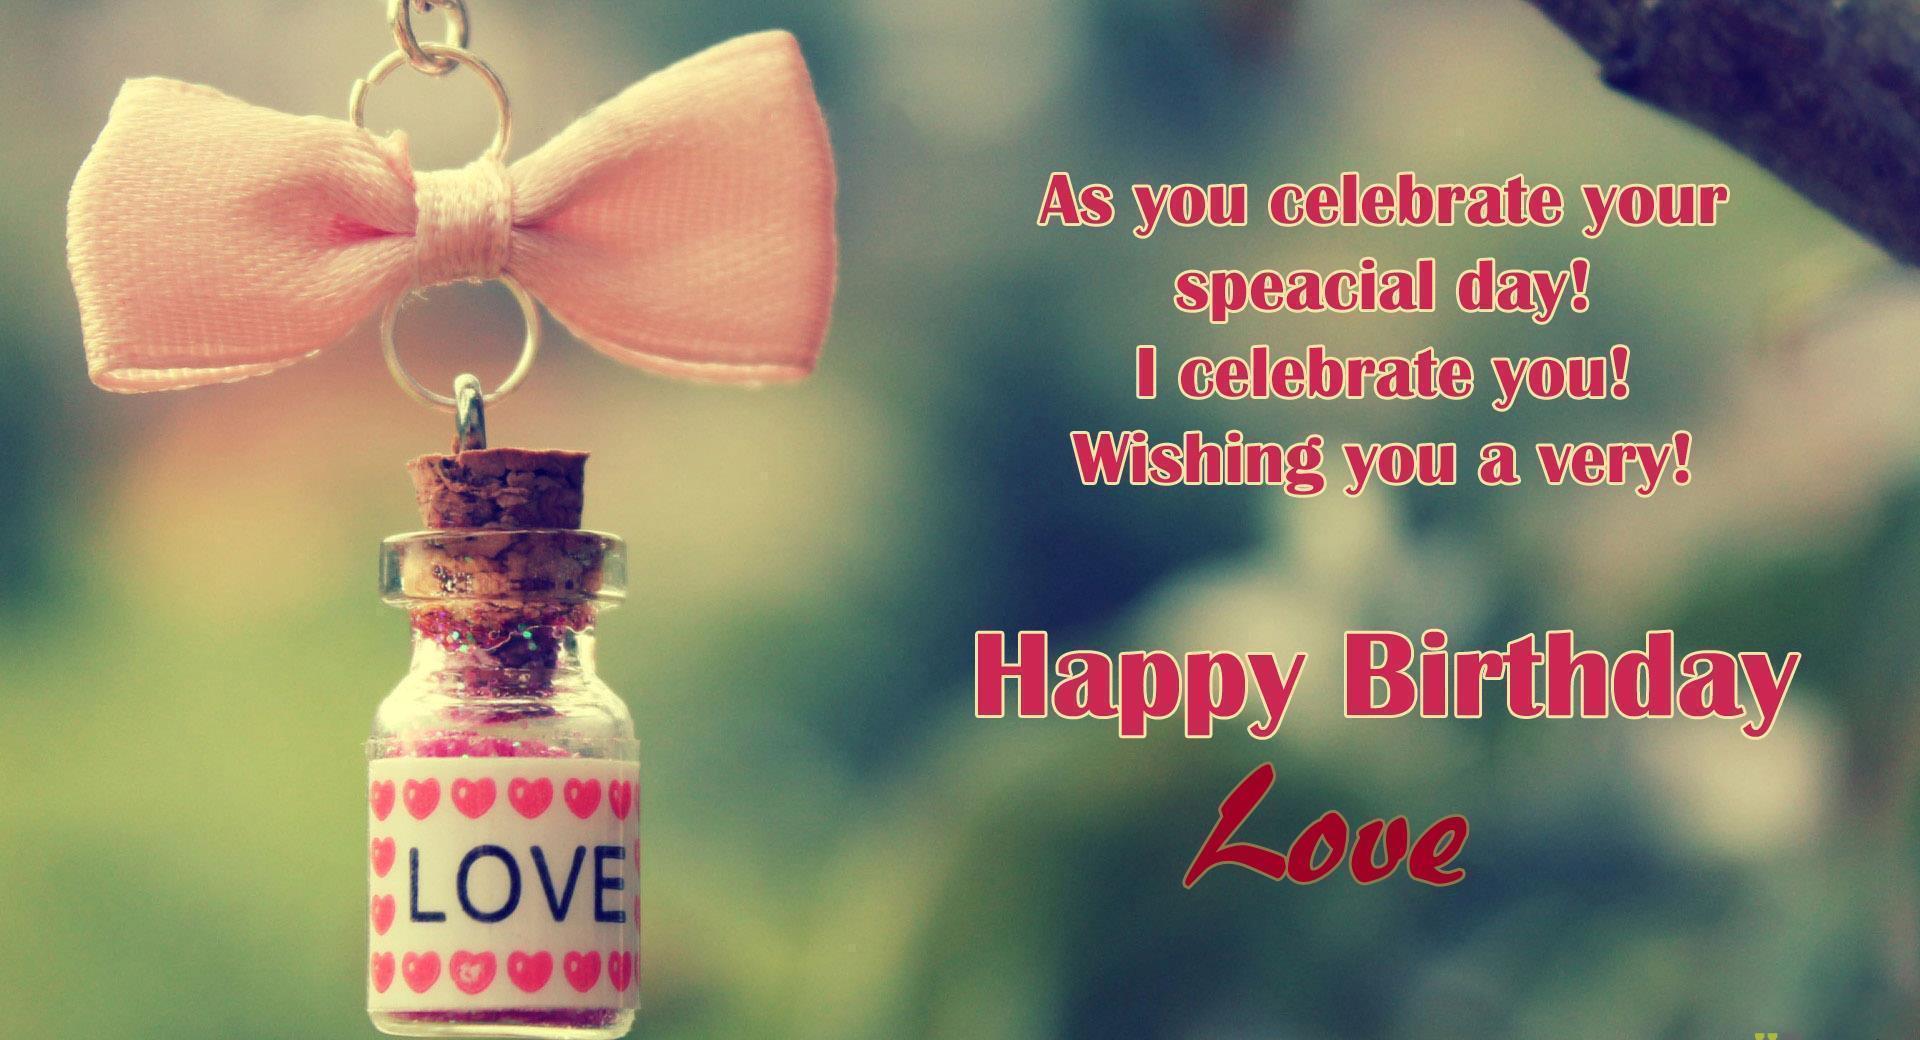 Happy Birthday To my Love HD Wallpapers, Messages & Quotes